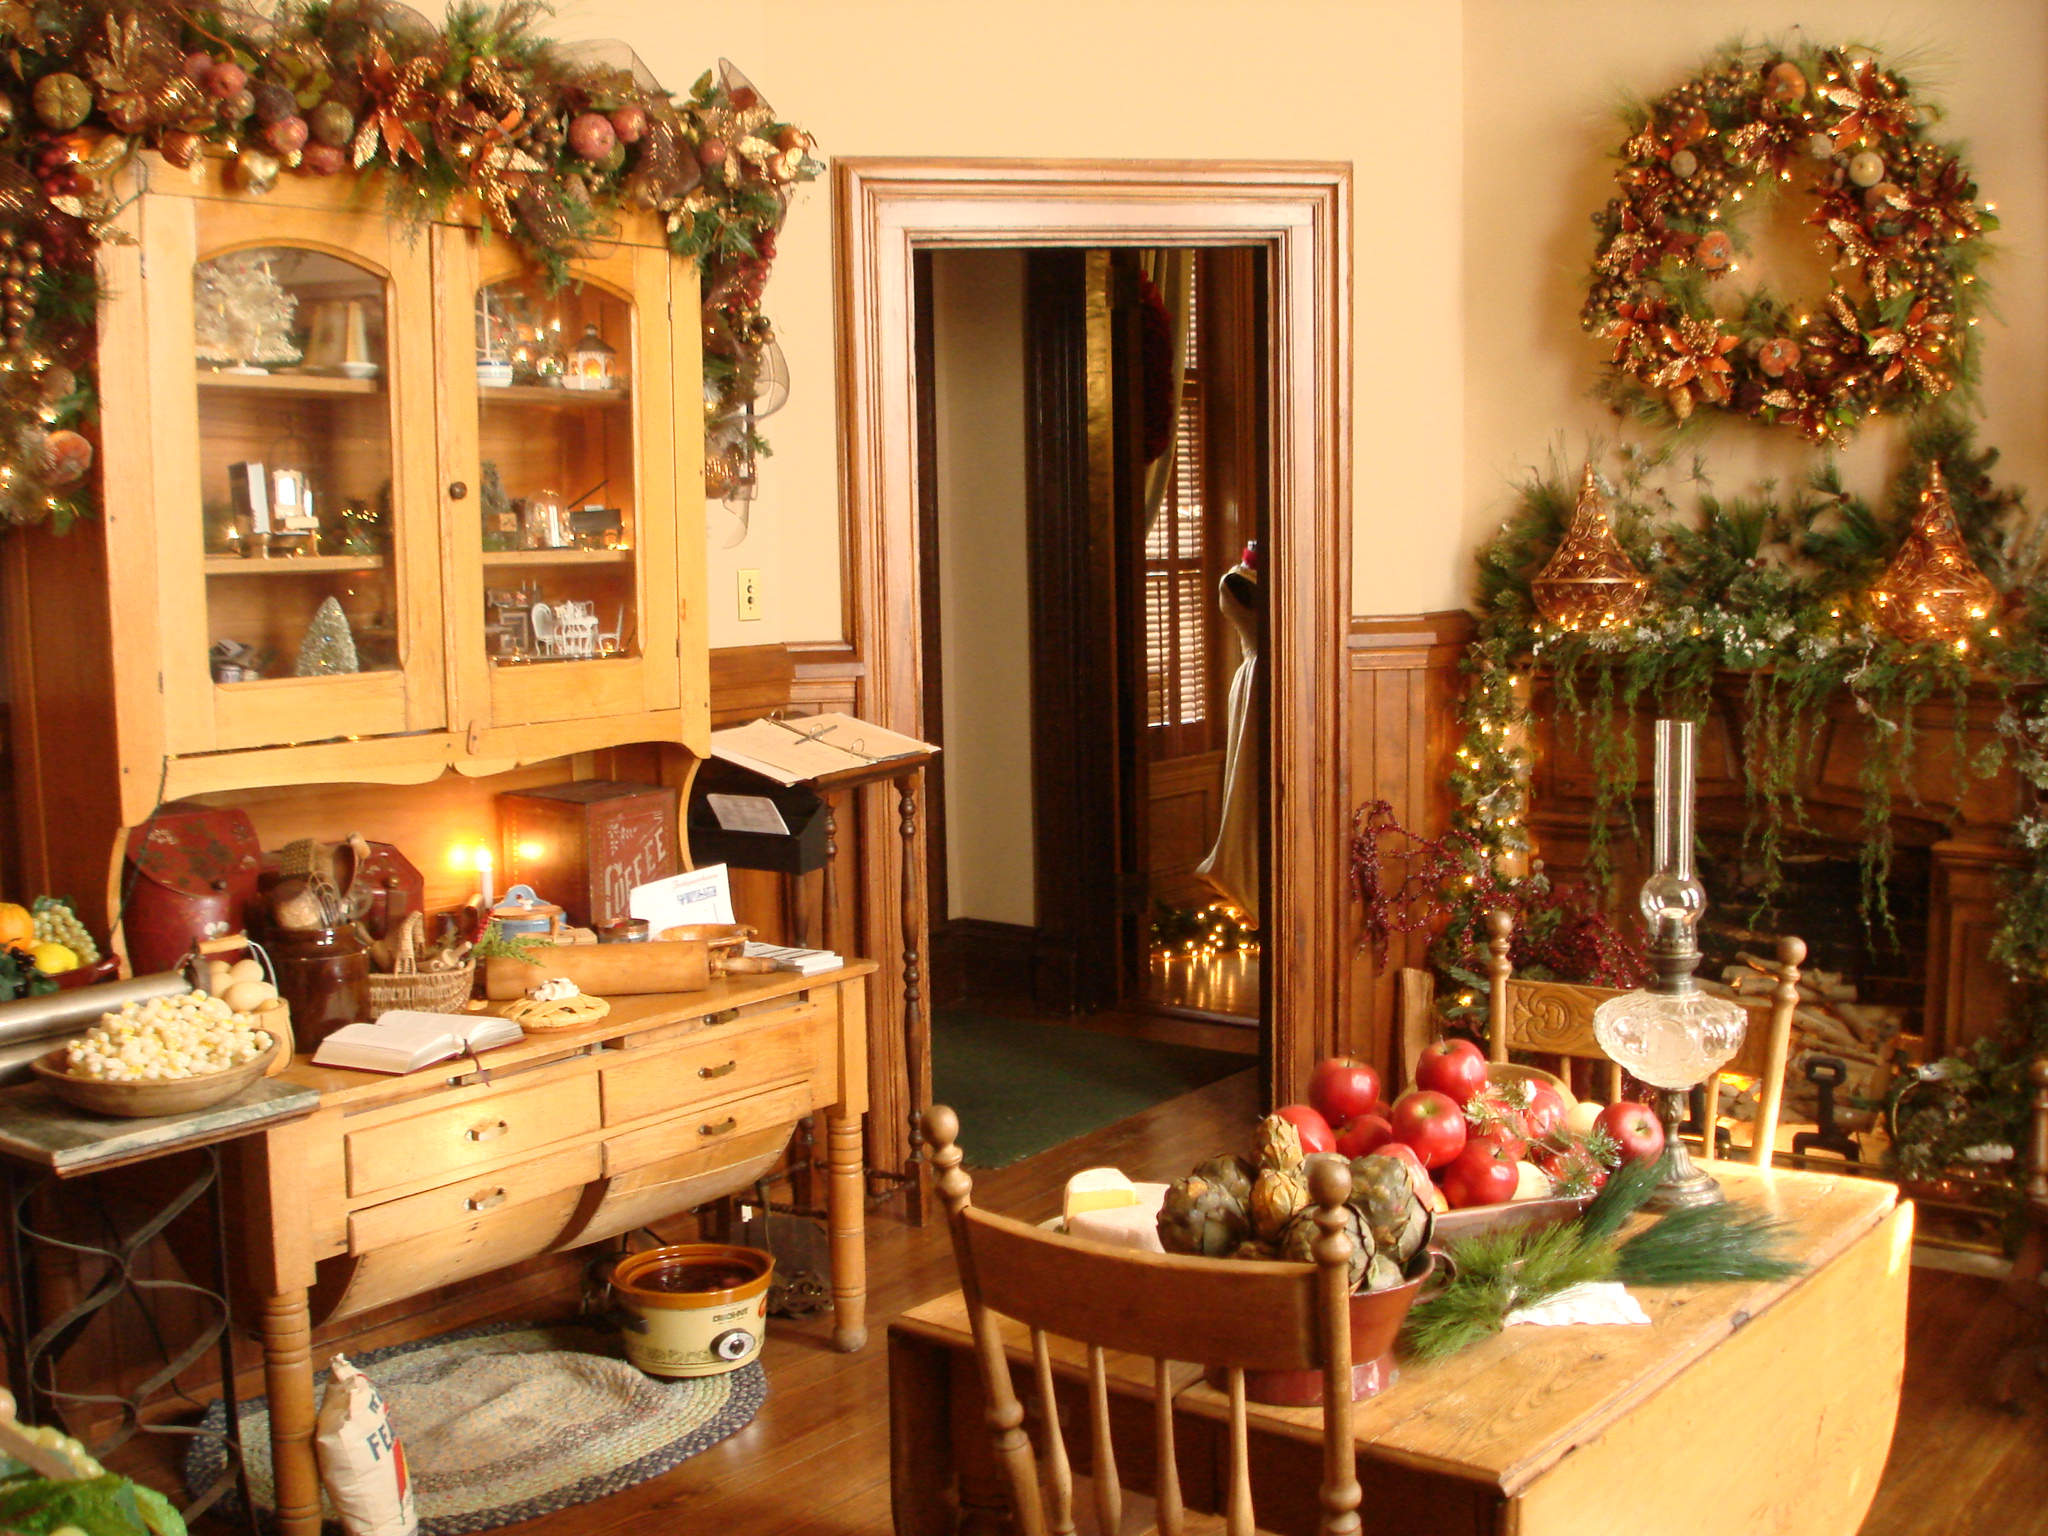 Kitchen at Vaile Mansion, "America's Christmas Castle", photo courtesy Valie Mansion